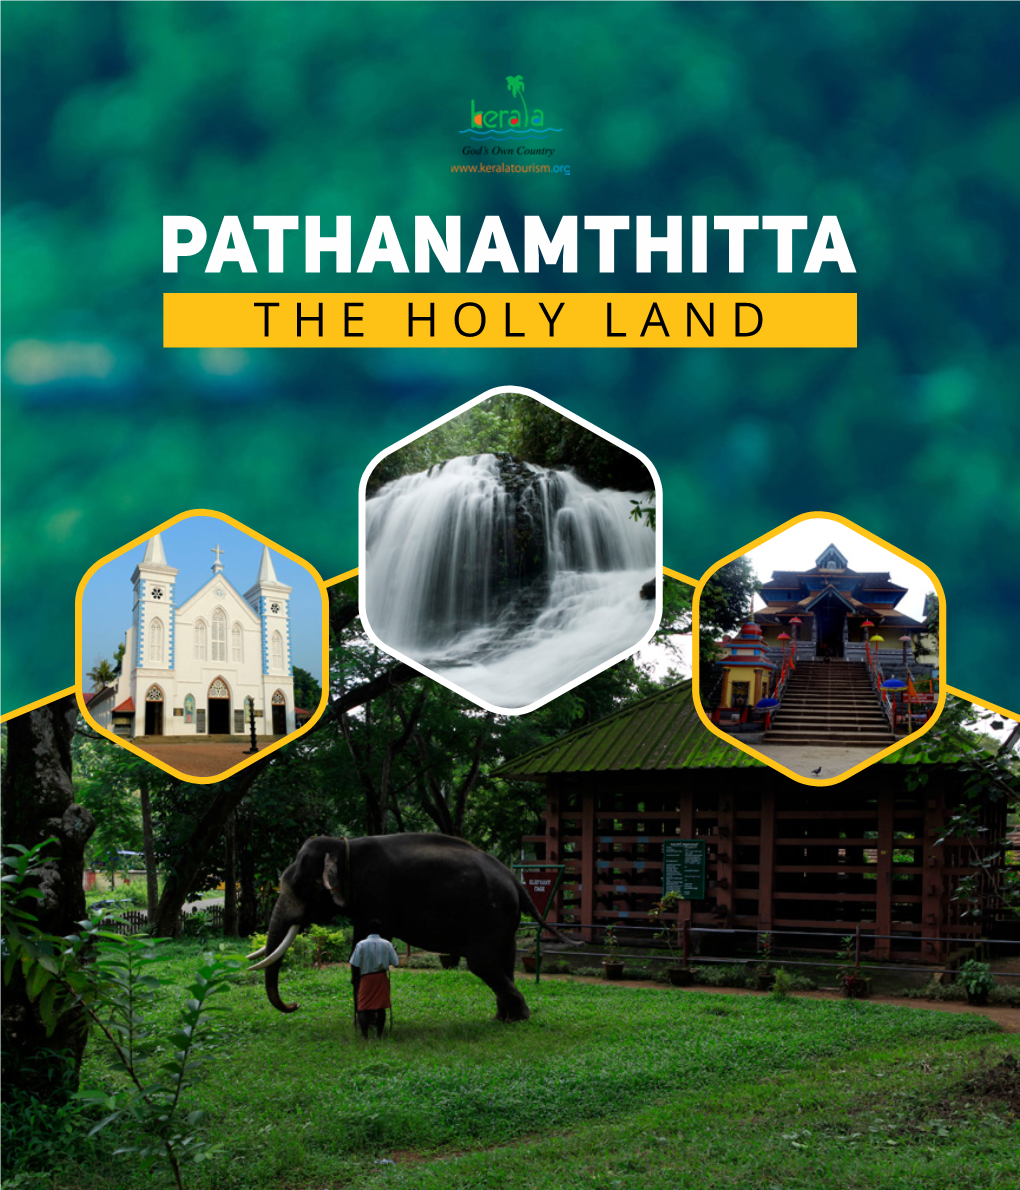 Pathanamthitta the HOLY LAND with a Plethora of Religious Places, Pathanamthitta (View Video) Is Fondly Referred to As the Holy Land